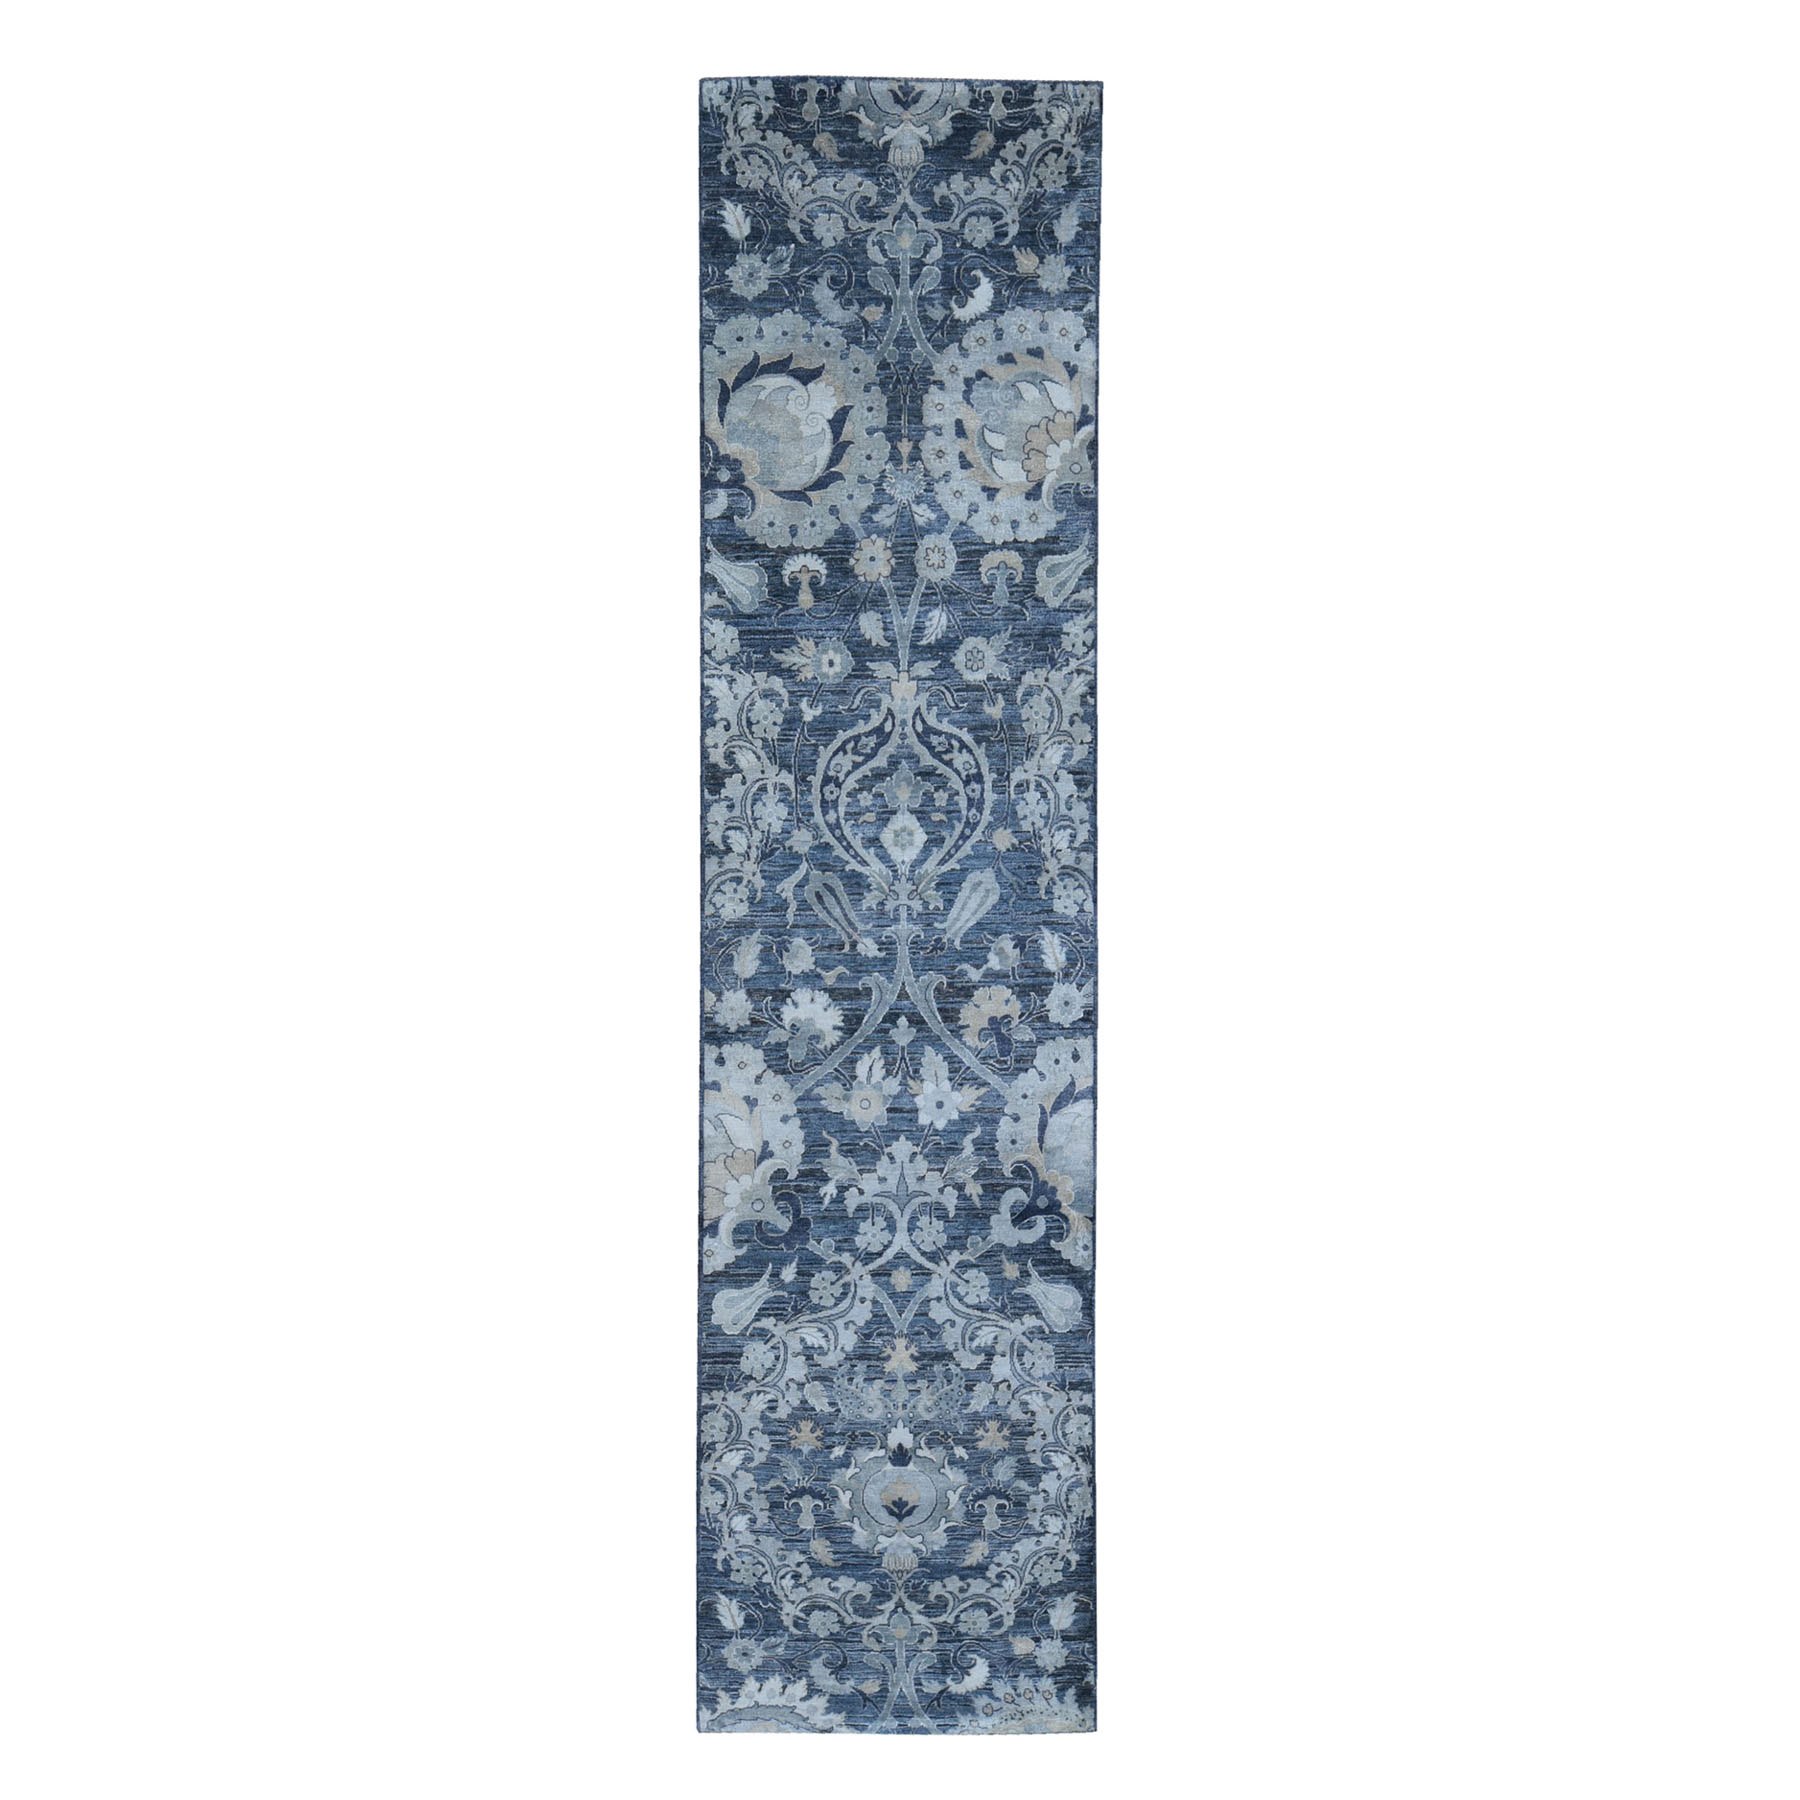 Wool-and-Silk-Hand-Knotted-Rug-299765